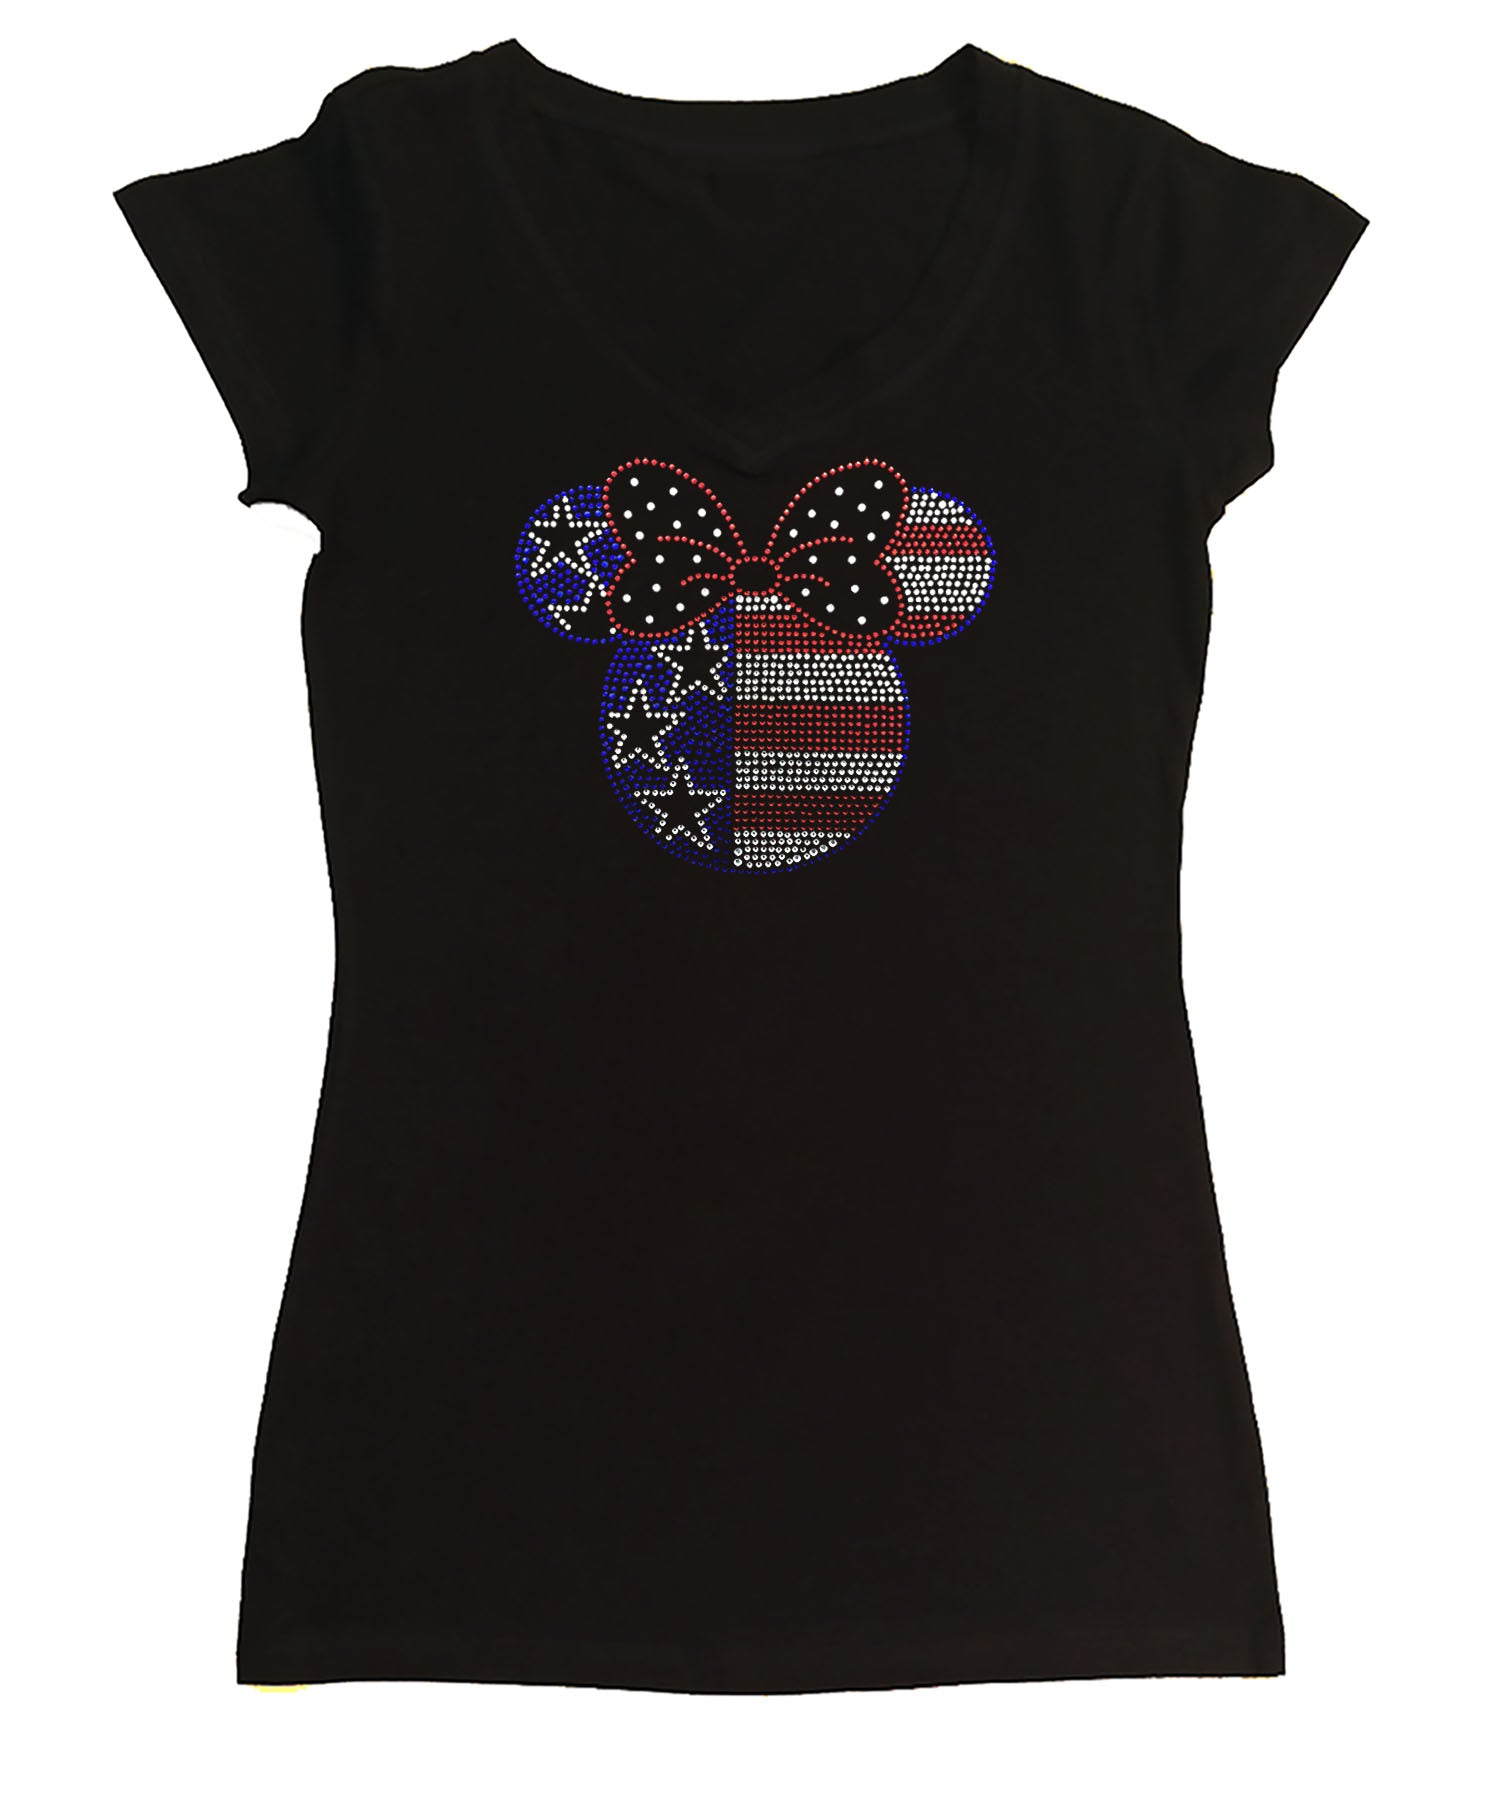 Womens T-shirt with Minnie Head 4th of July in Rhinestones